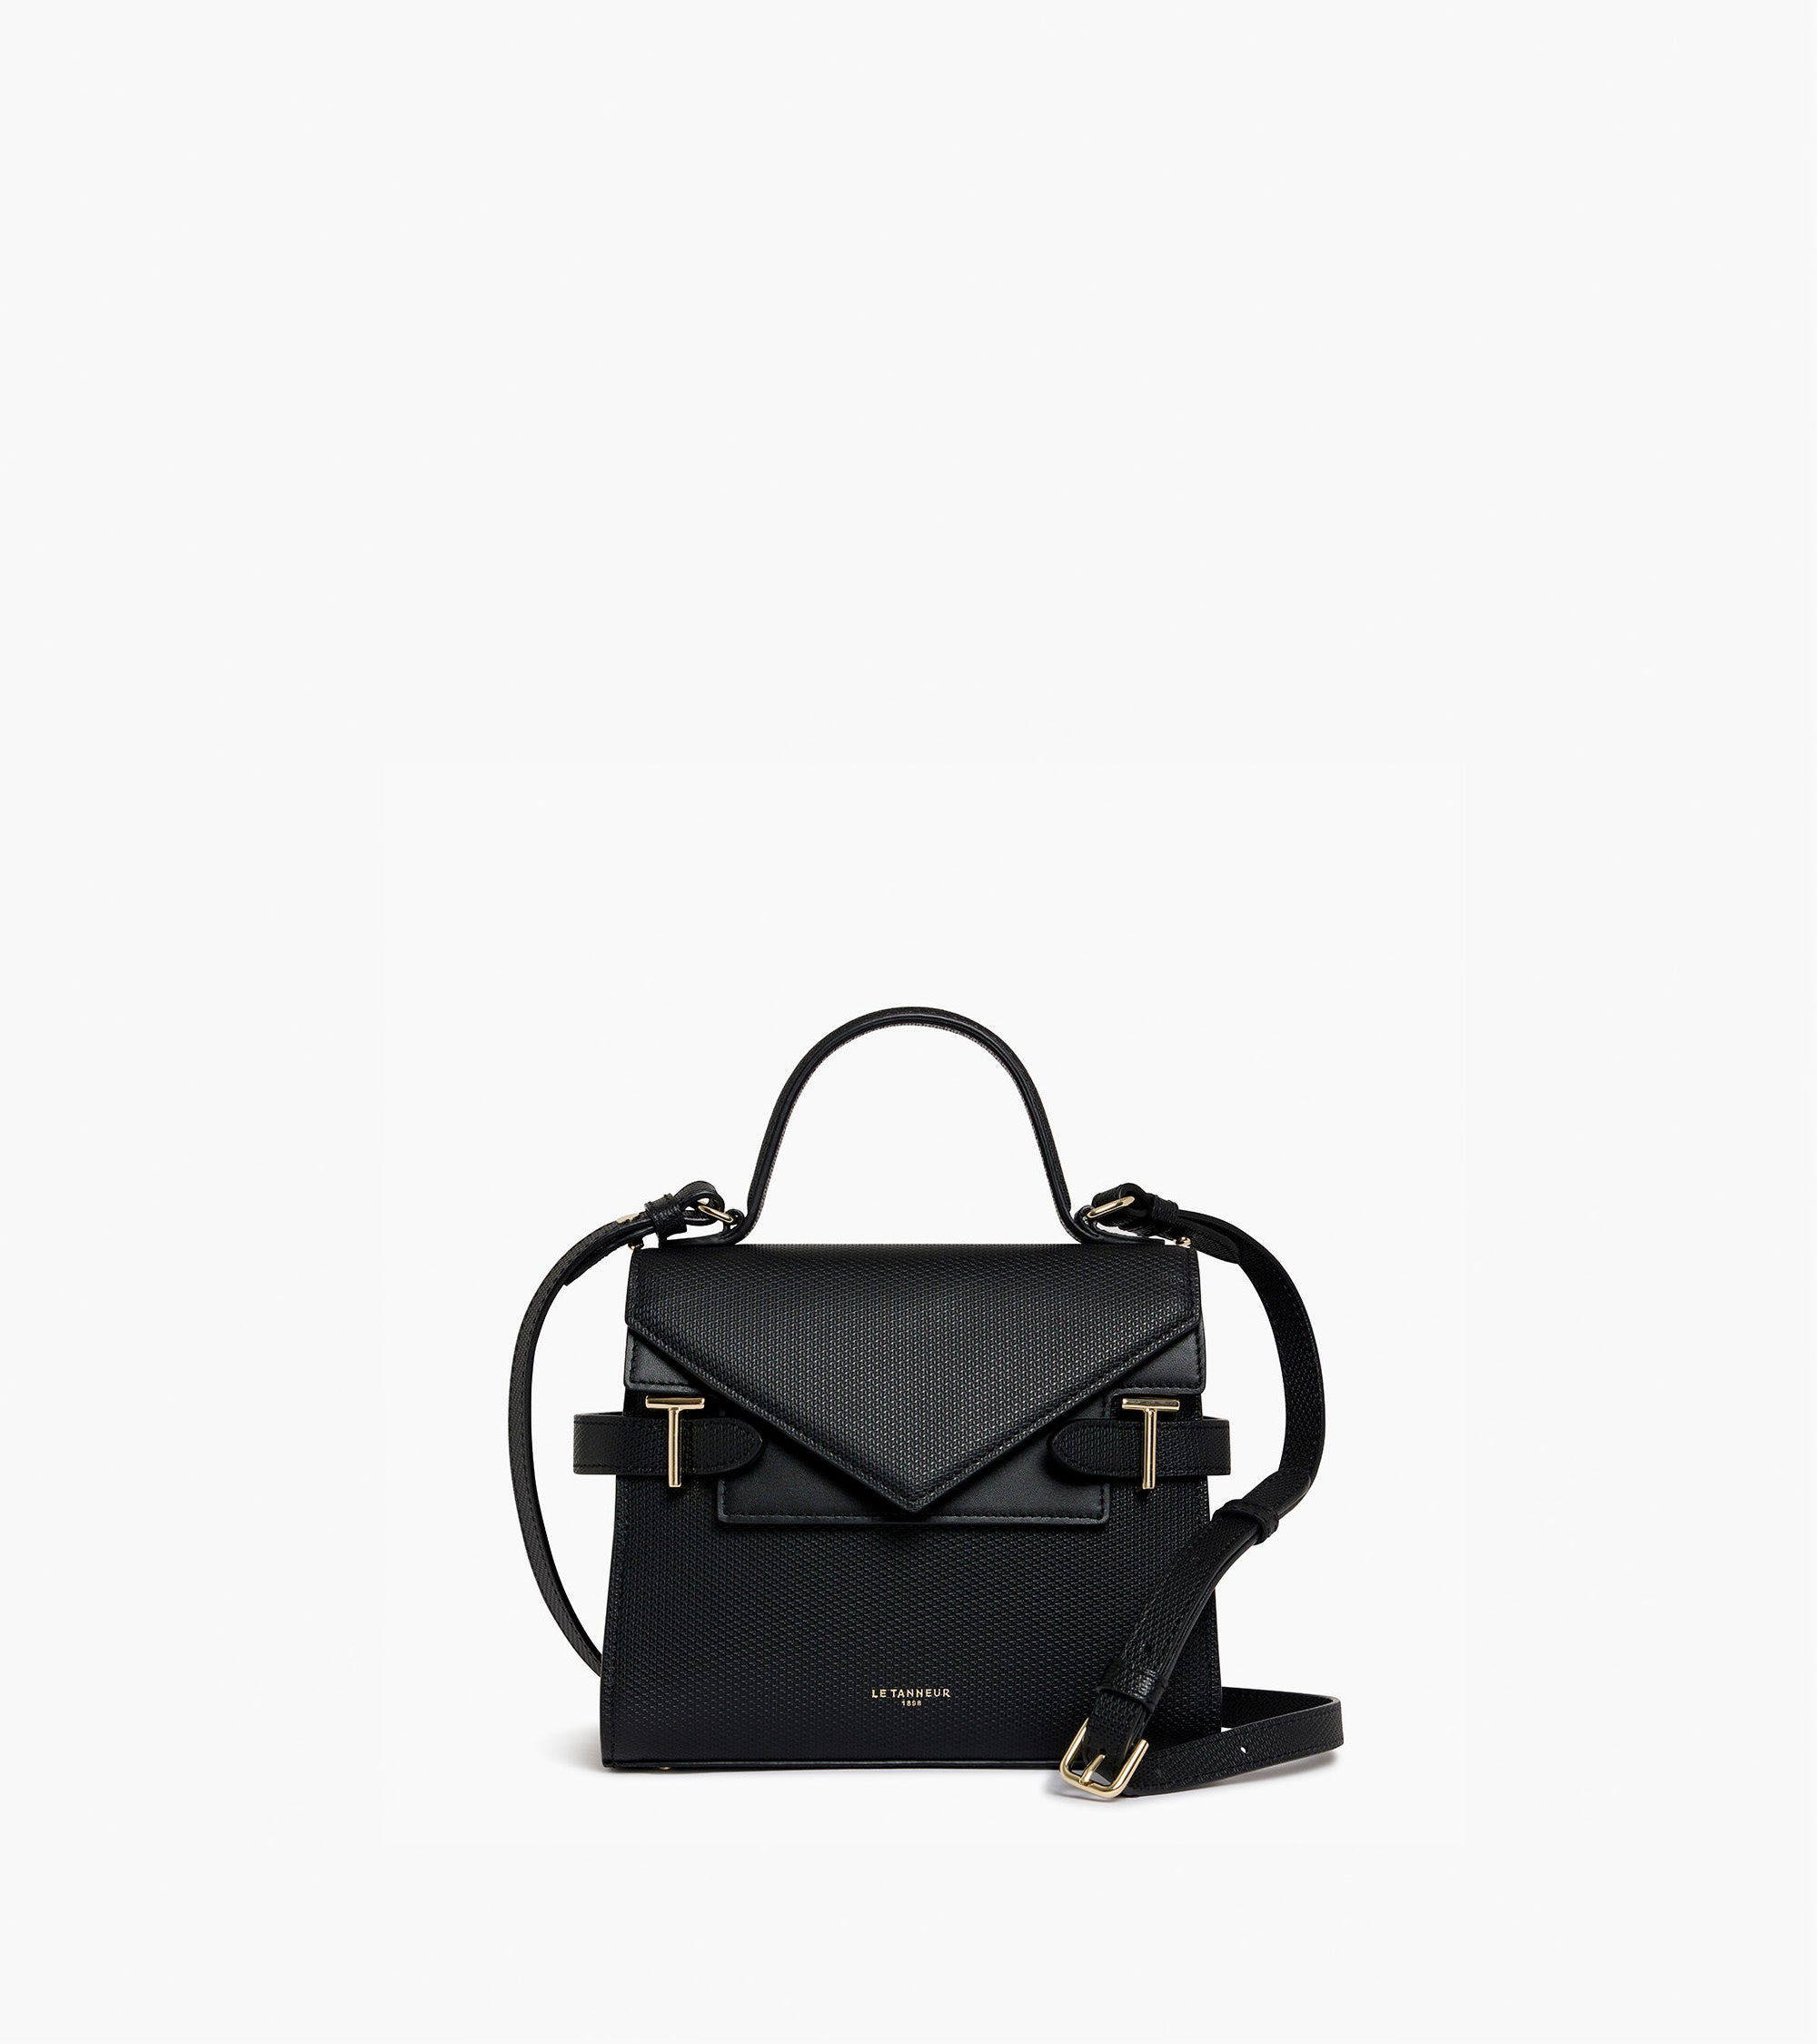 Emilie small handbag with double flap in T-signature leather